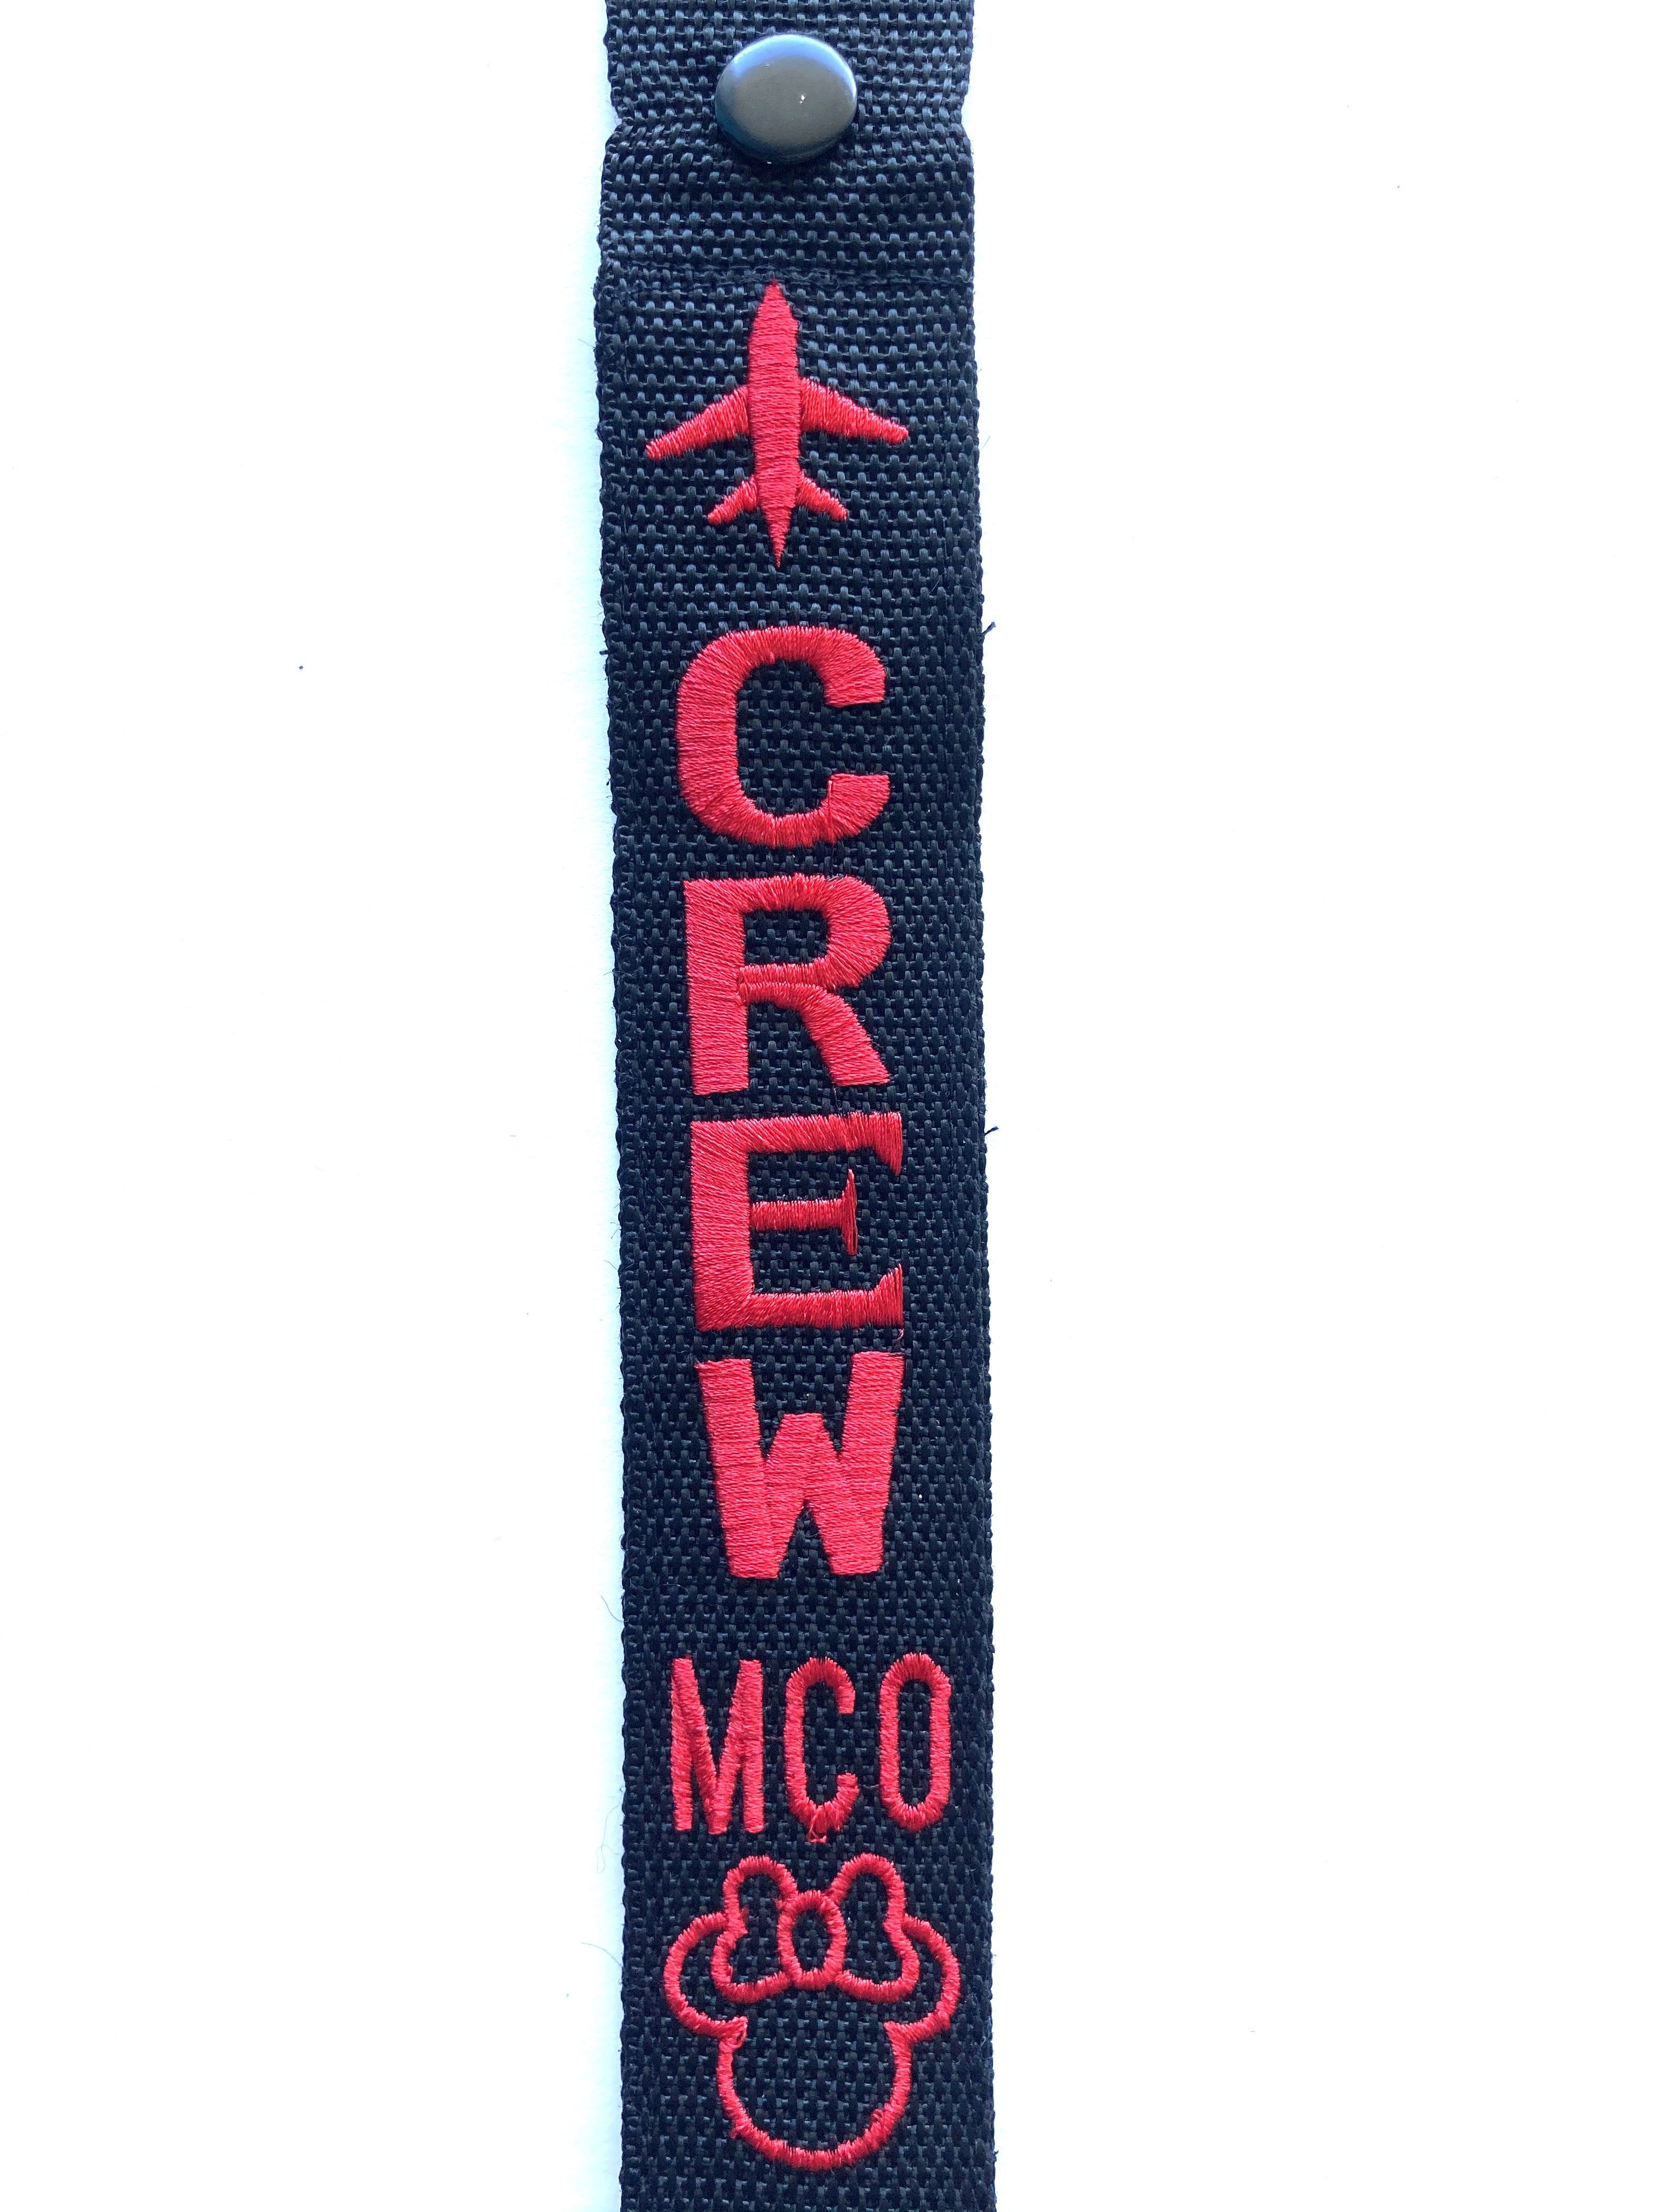 CREW Luggage Tag - MCO Red Minnie